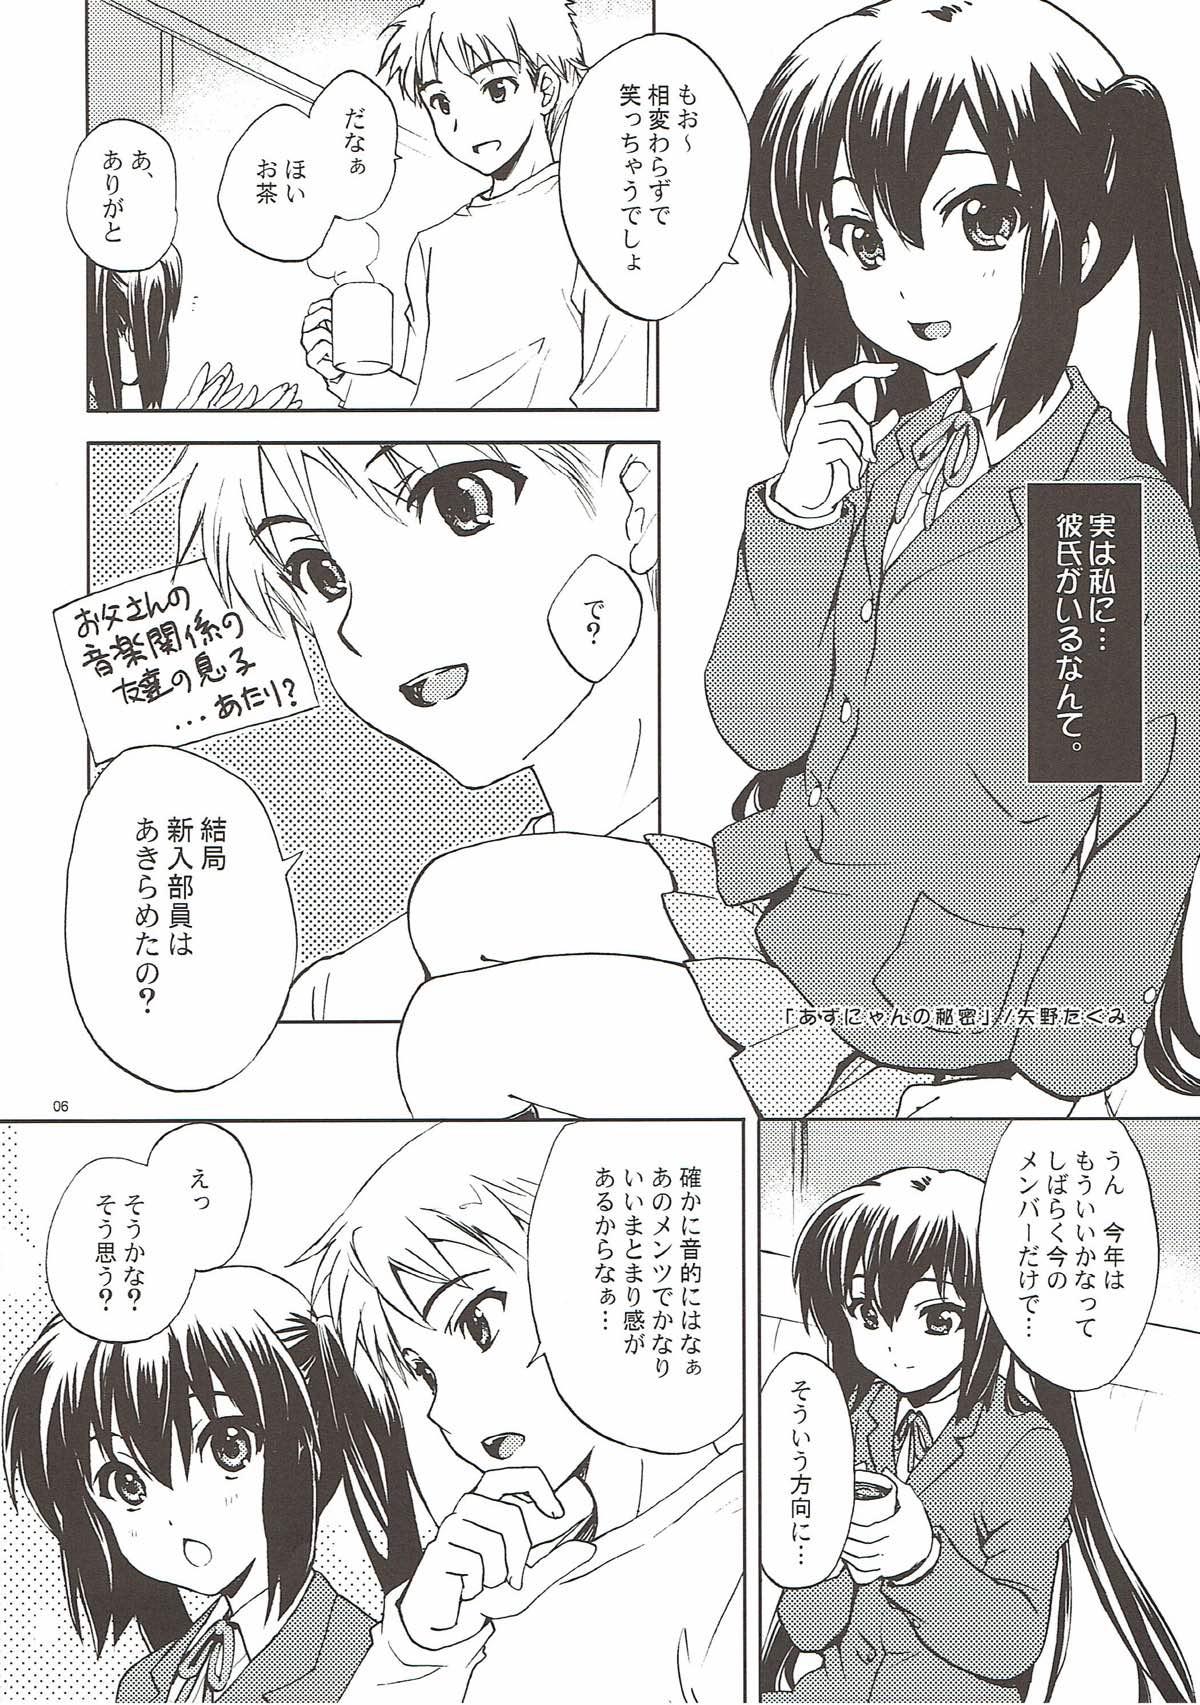 Funk Strawberry Kiss - K-on Russian - Page 4